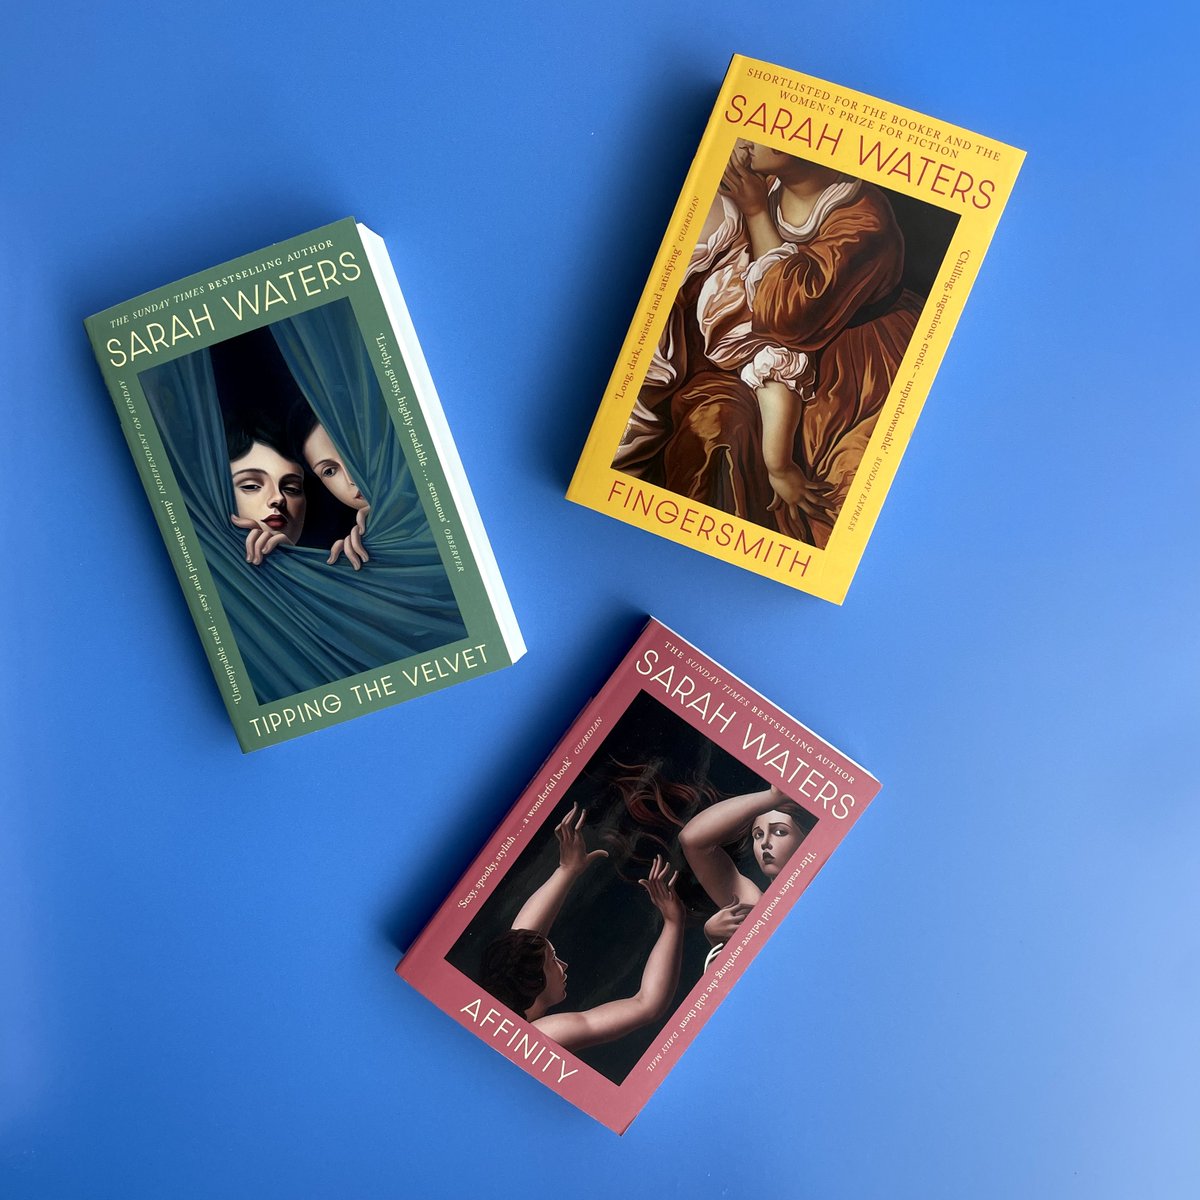 ✨ Out today✨ Stunning new look editions for Sarah Waters’ Victorian novels. Spellbinding, simmering and written with startling power, these novels have thrilled and delighted readers since their first publication. Get yours now: brnw.ch/21wJP6u